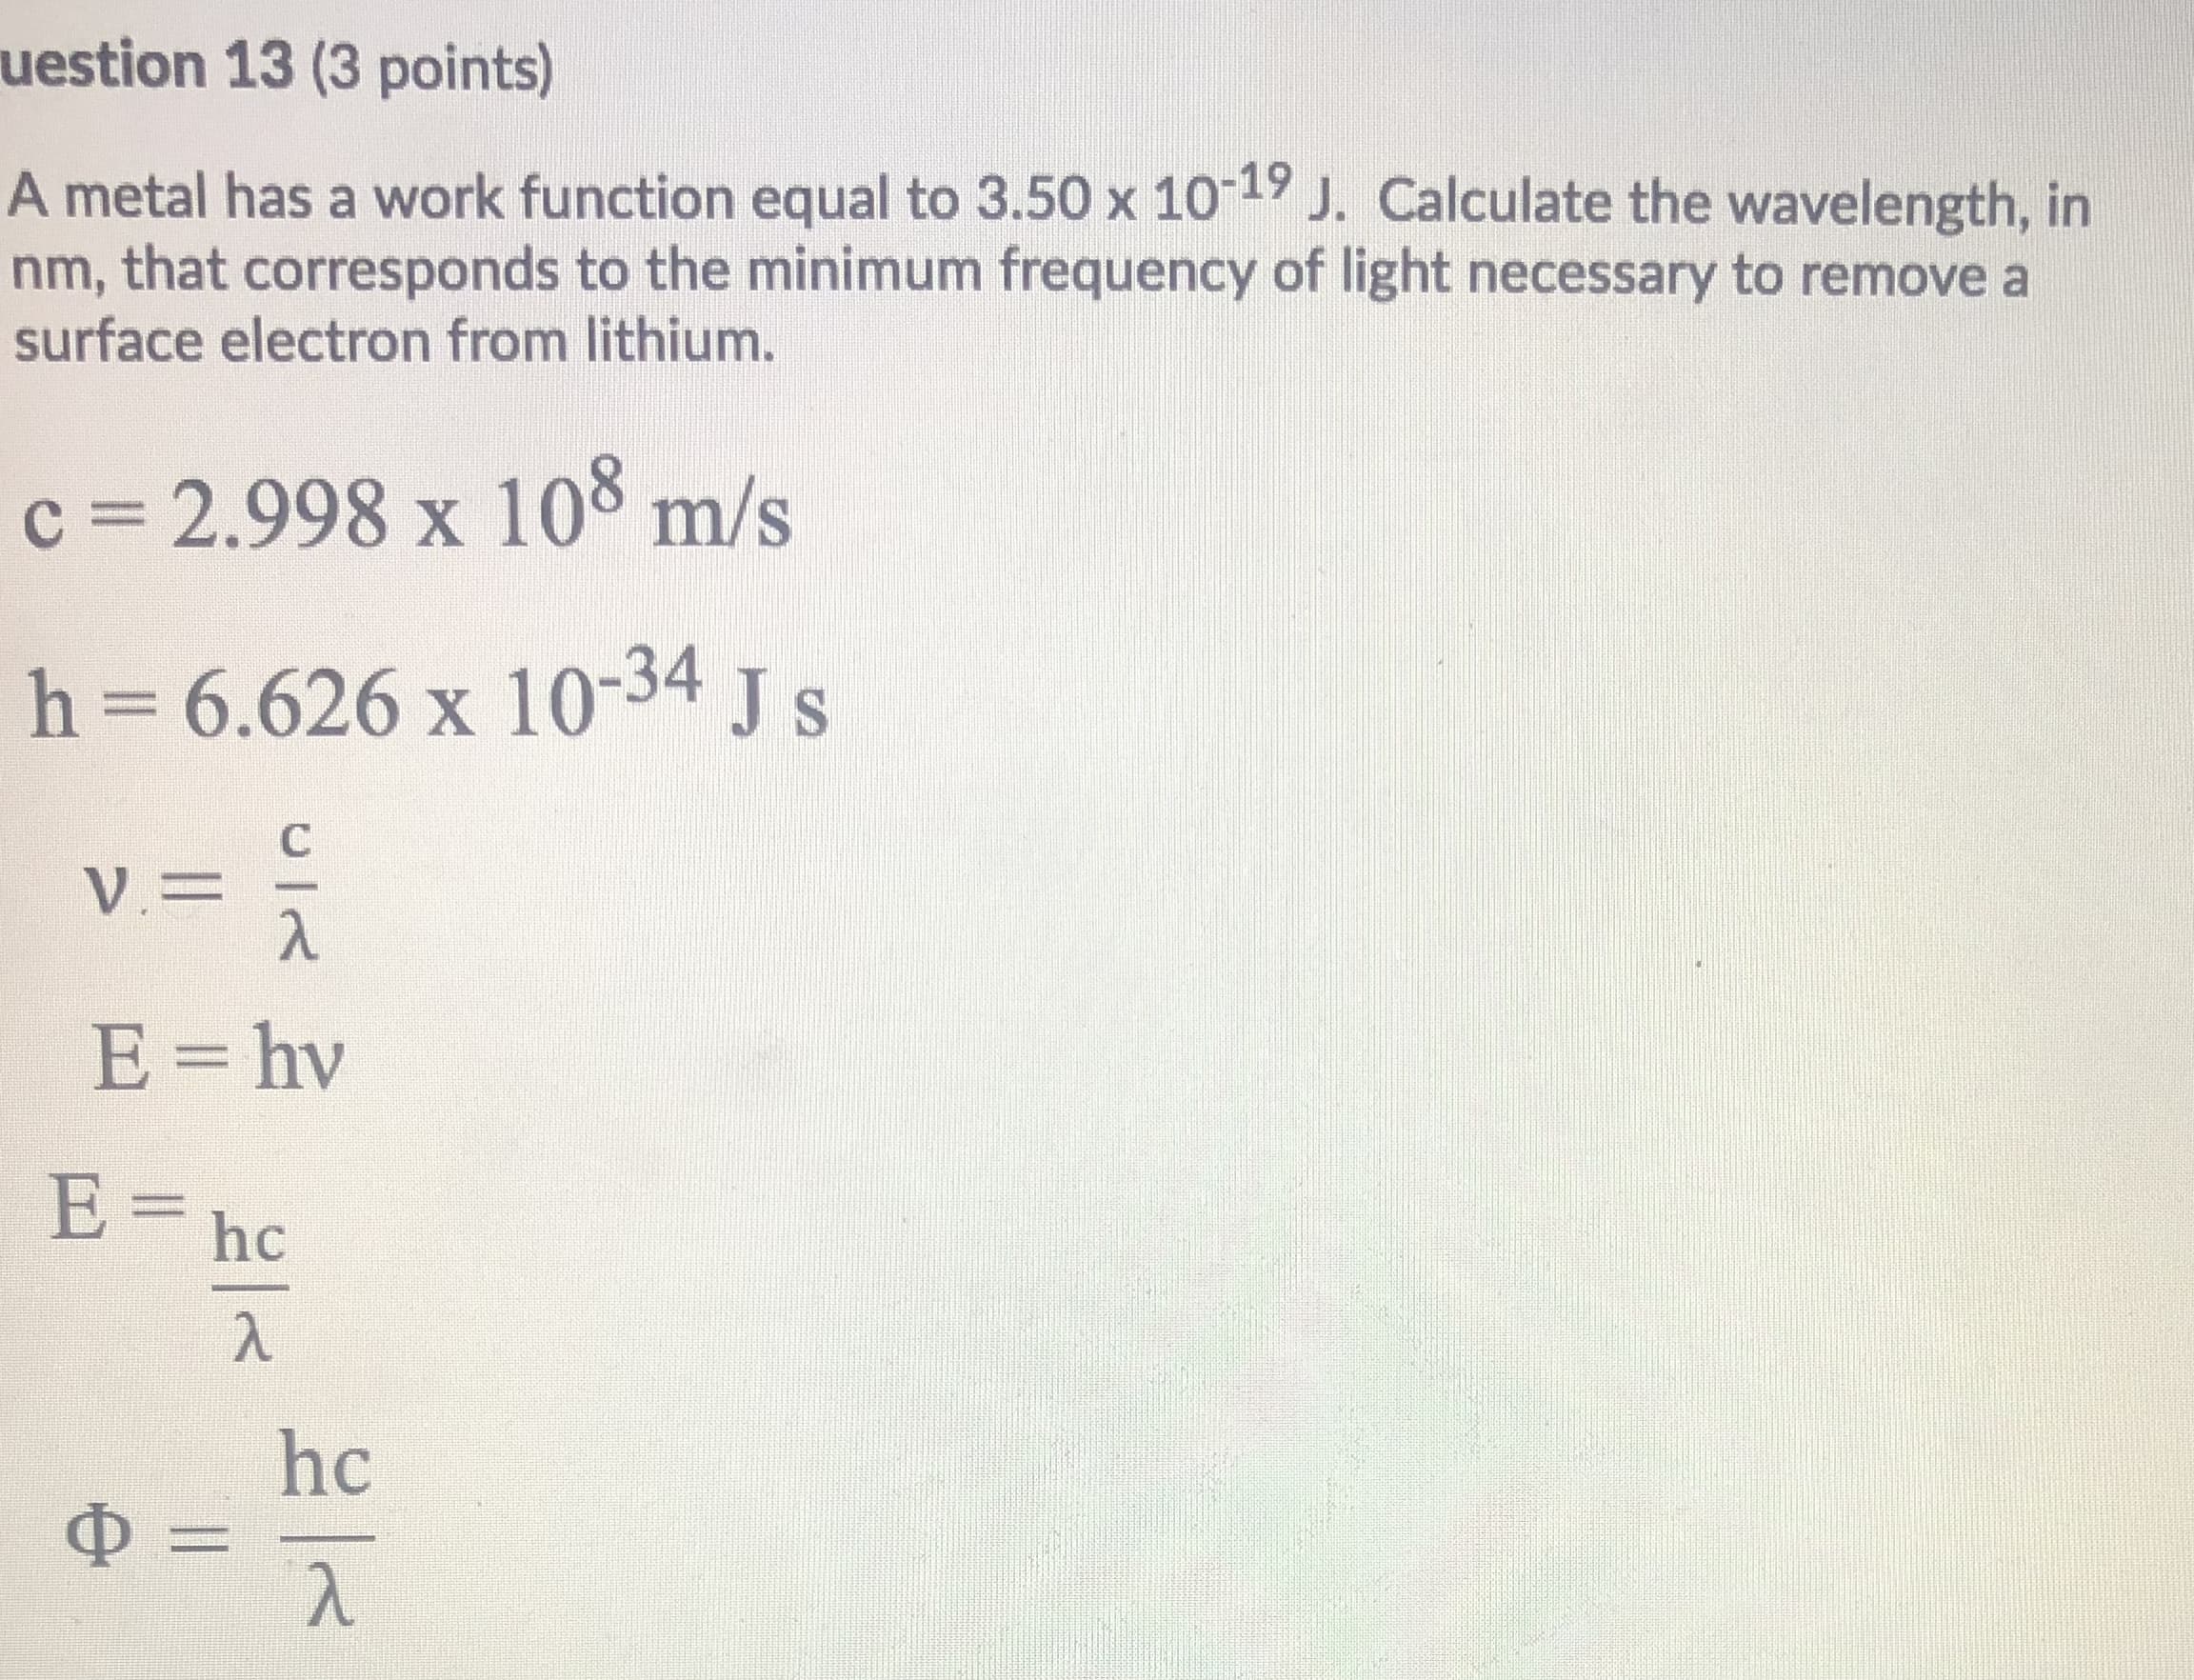 A metal has a work function equal to 3.50 x 10-19 J. Calculate the wavelength, in
nm, that corresponds to the minimum frequency of light necessary to remove a
surface electron from lithium.
c = 2.998 x 108 m/s
h = 6.626 x 10-34 J s
